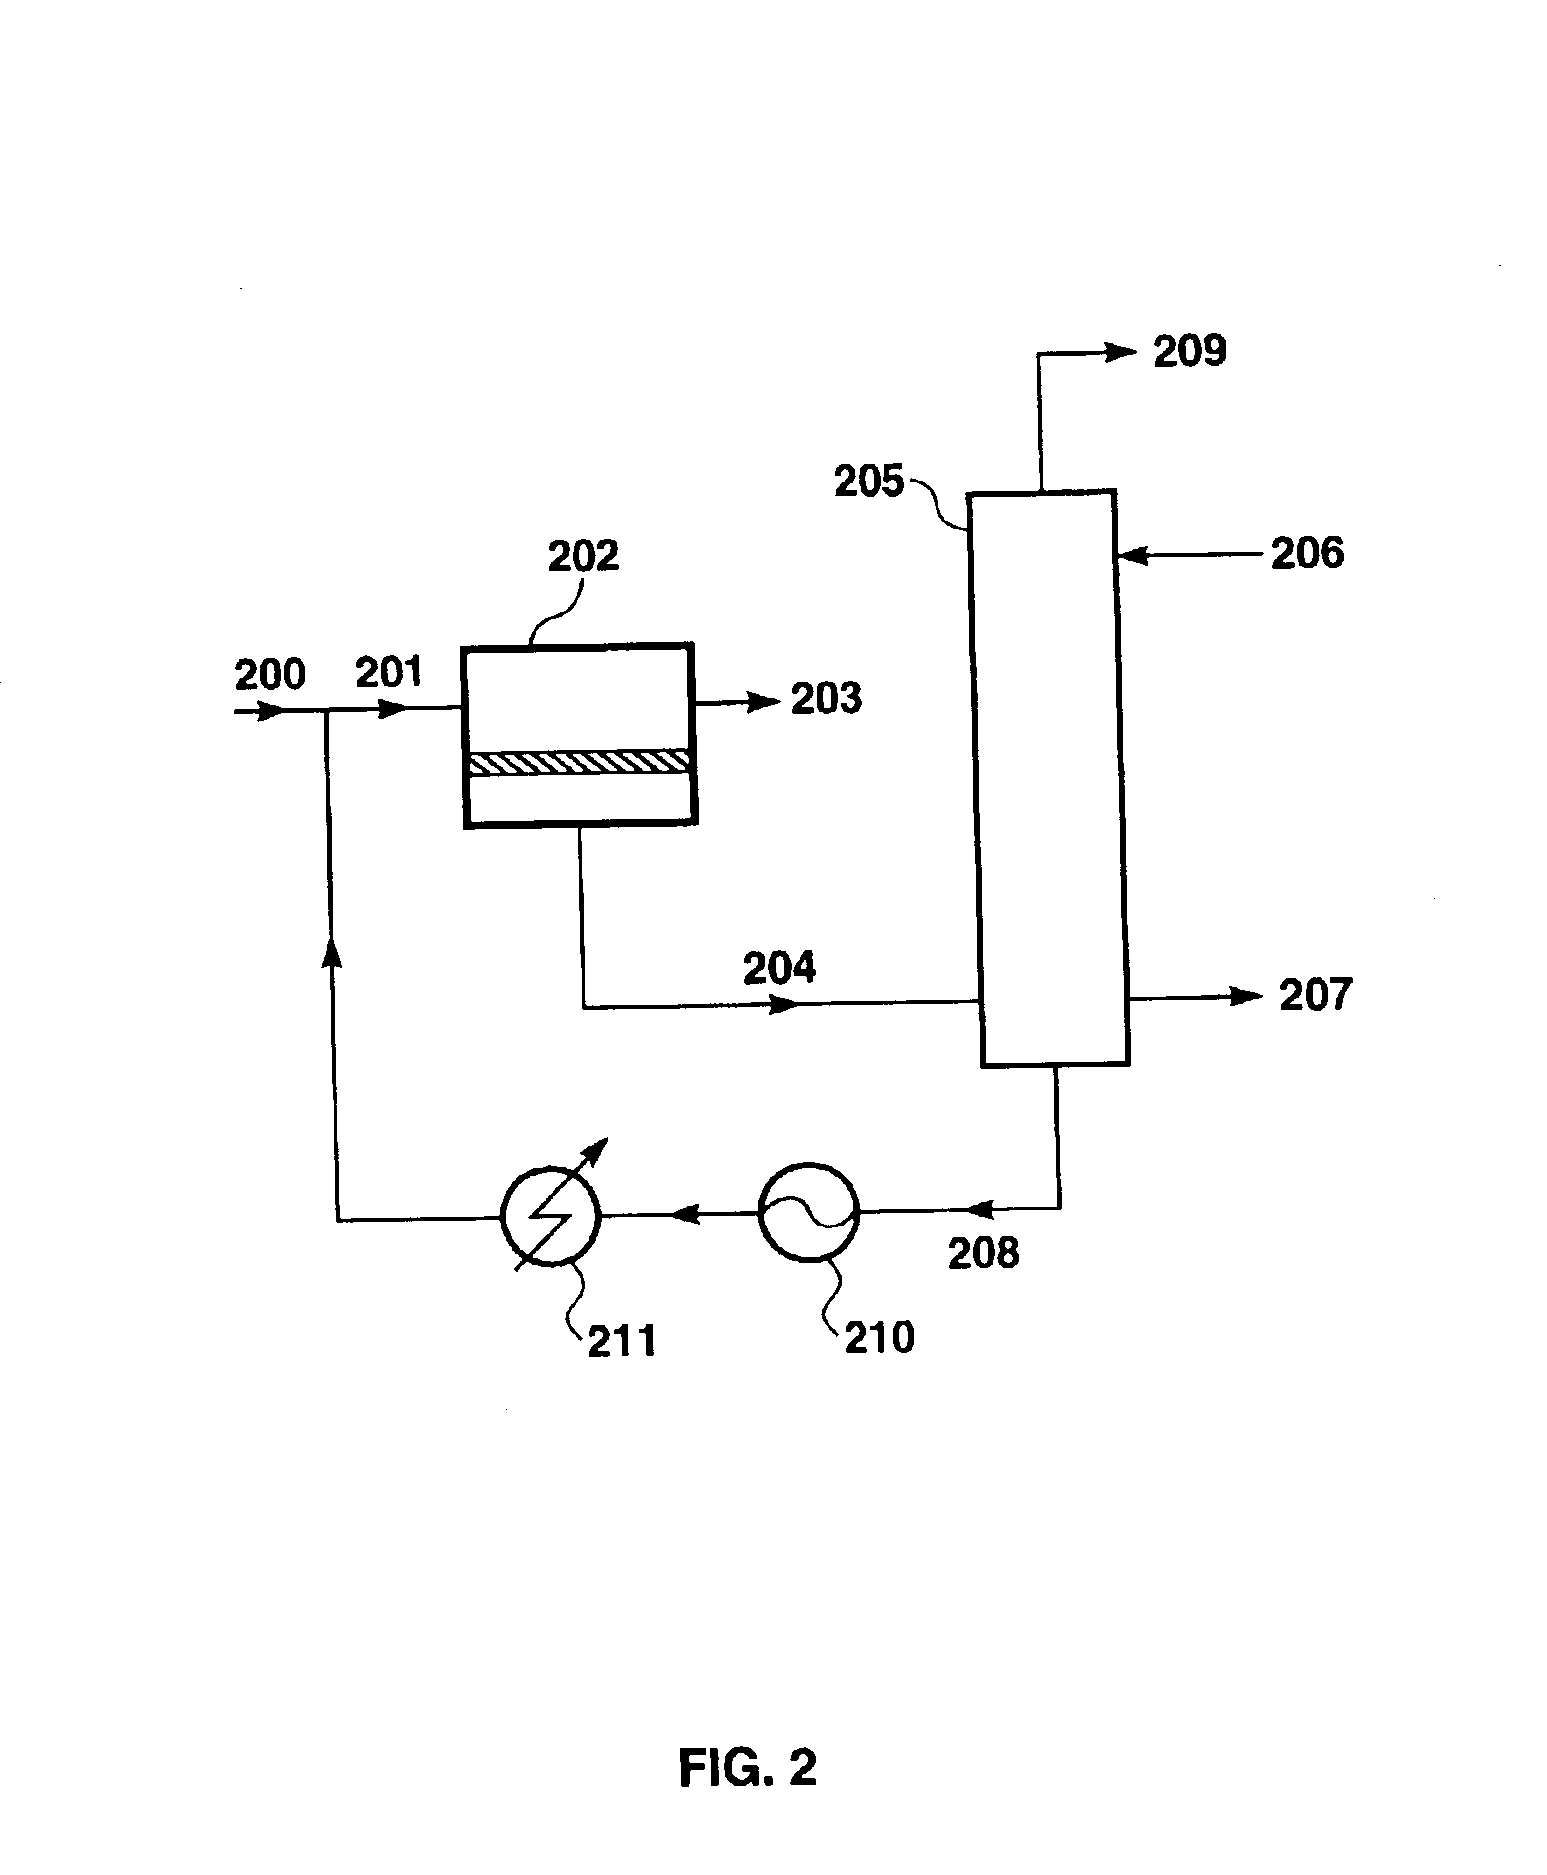 Separation of organic mixtures using gas separation or pervaporation and dephlegmation